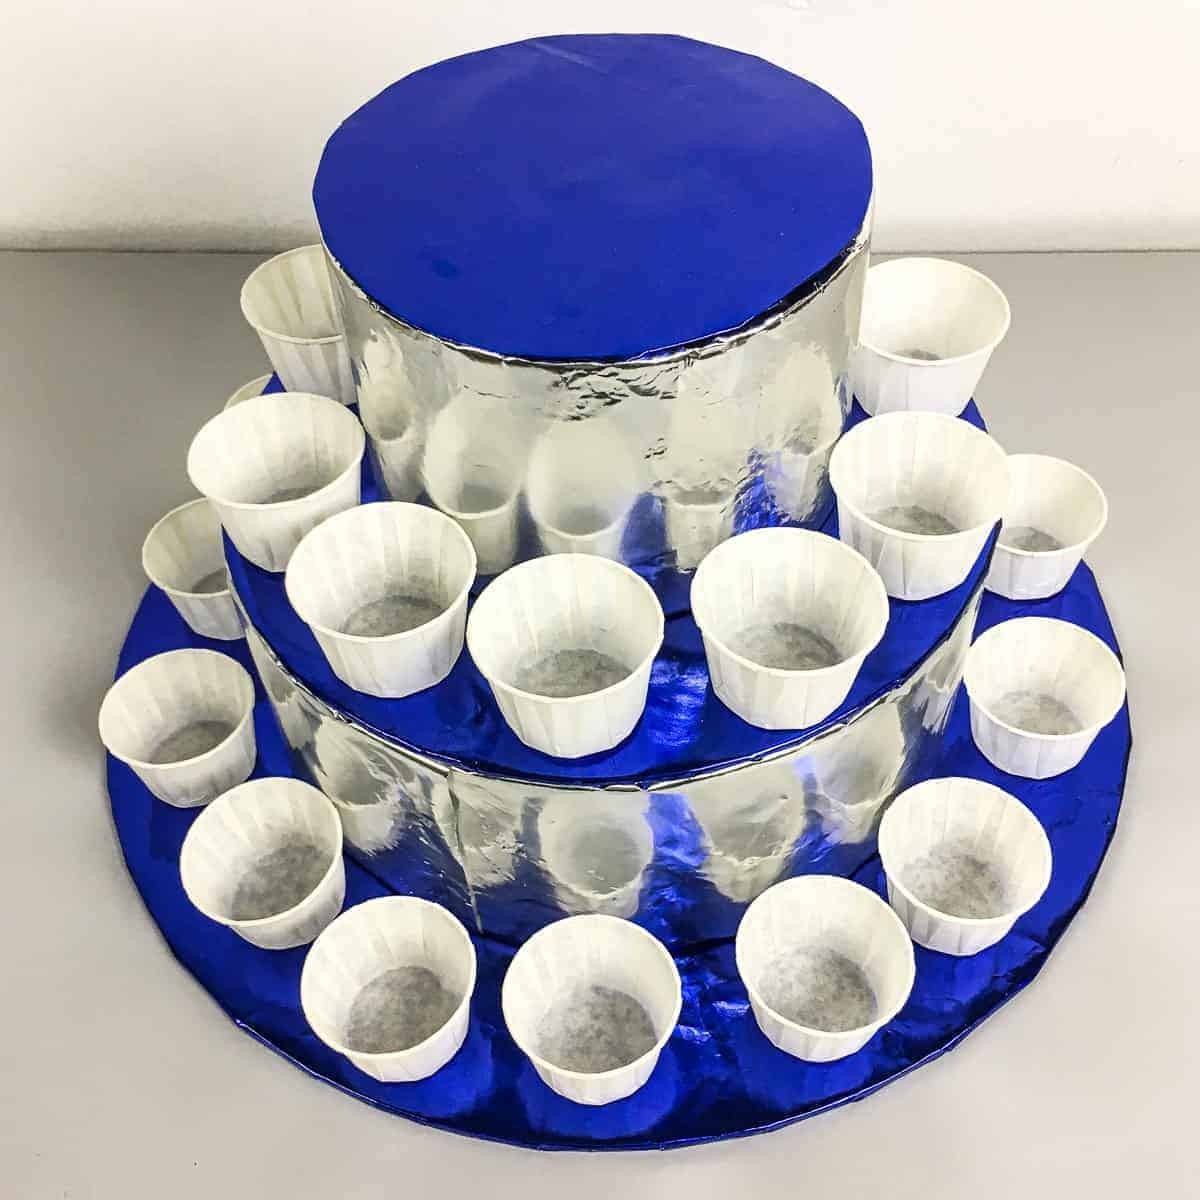 DIY cupcake stand in blue and silver.